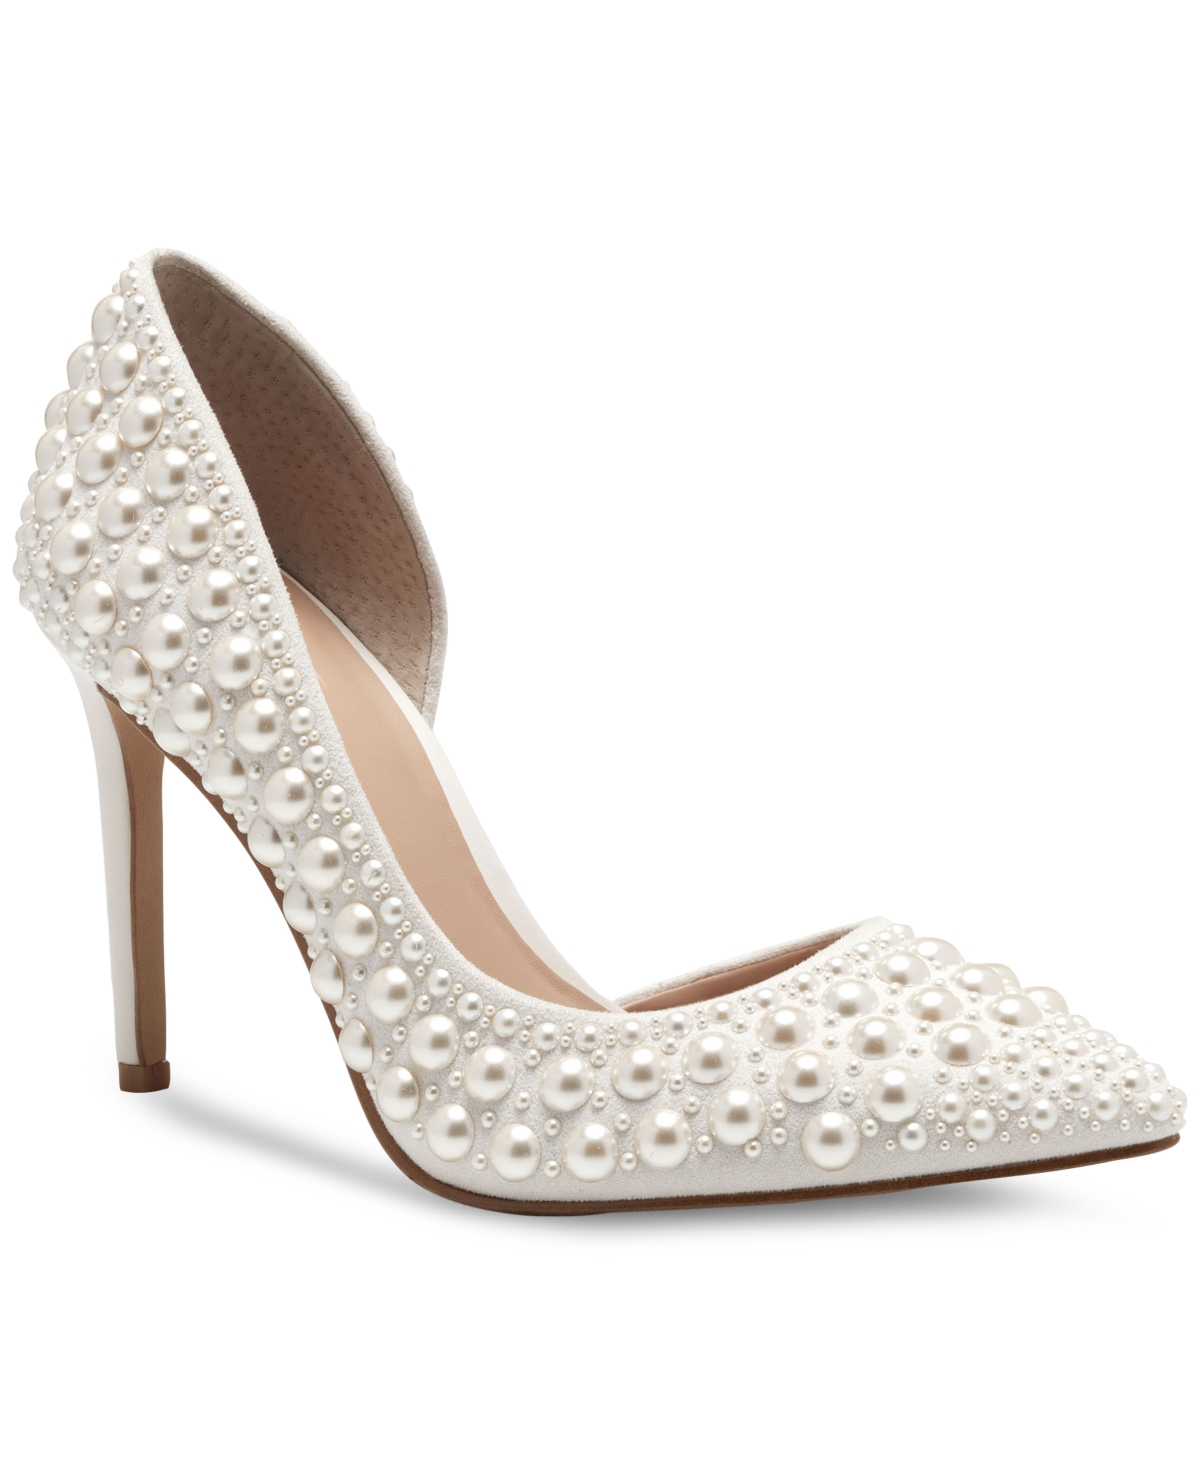 Women's Kenjay d'Orsay Pumps, Created for Macy's - Pearl